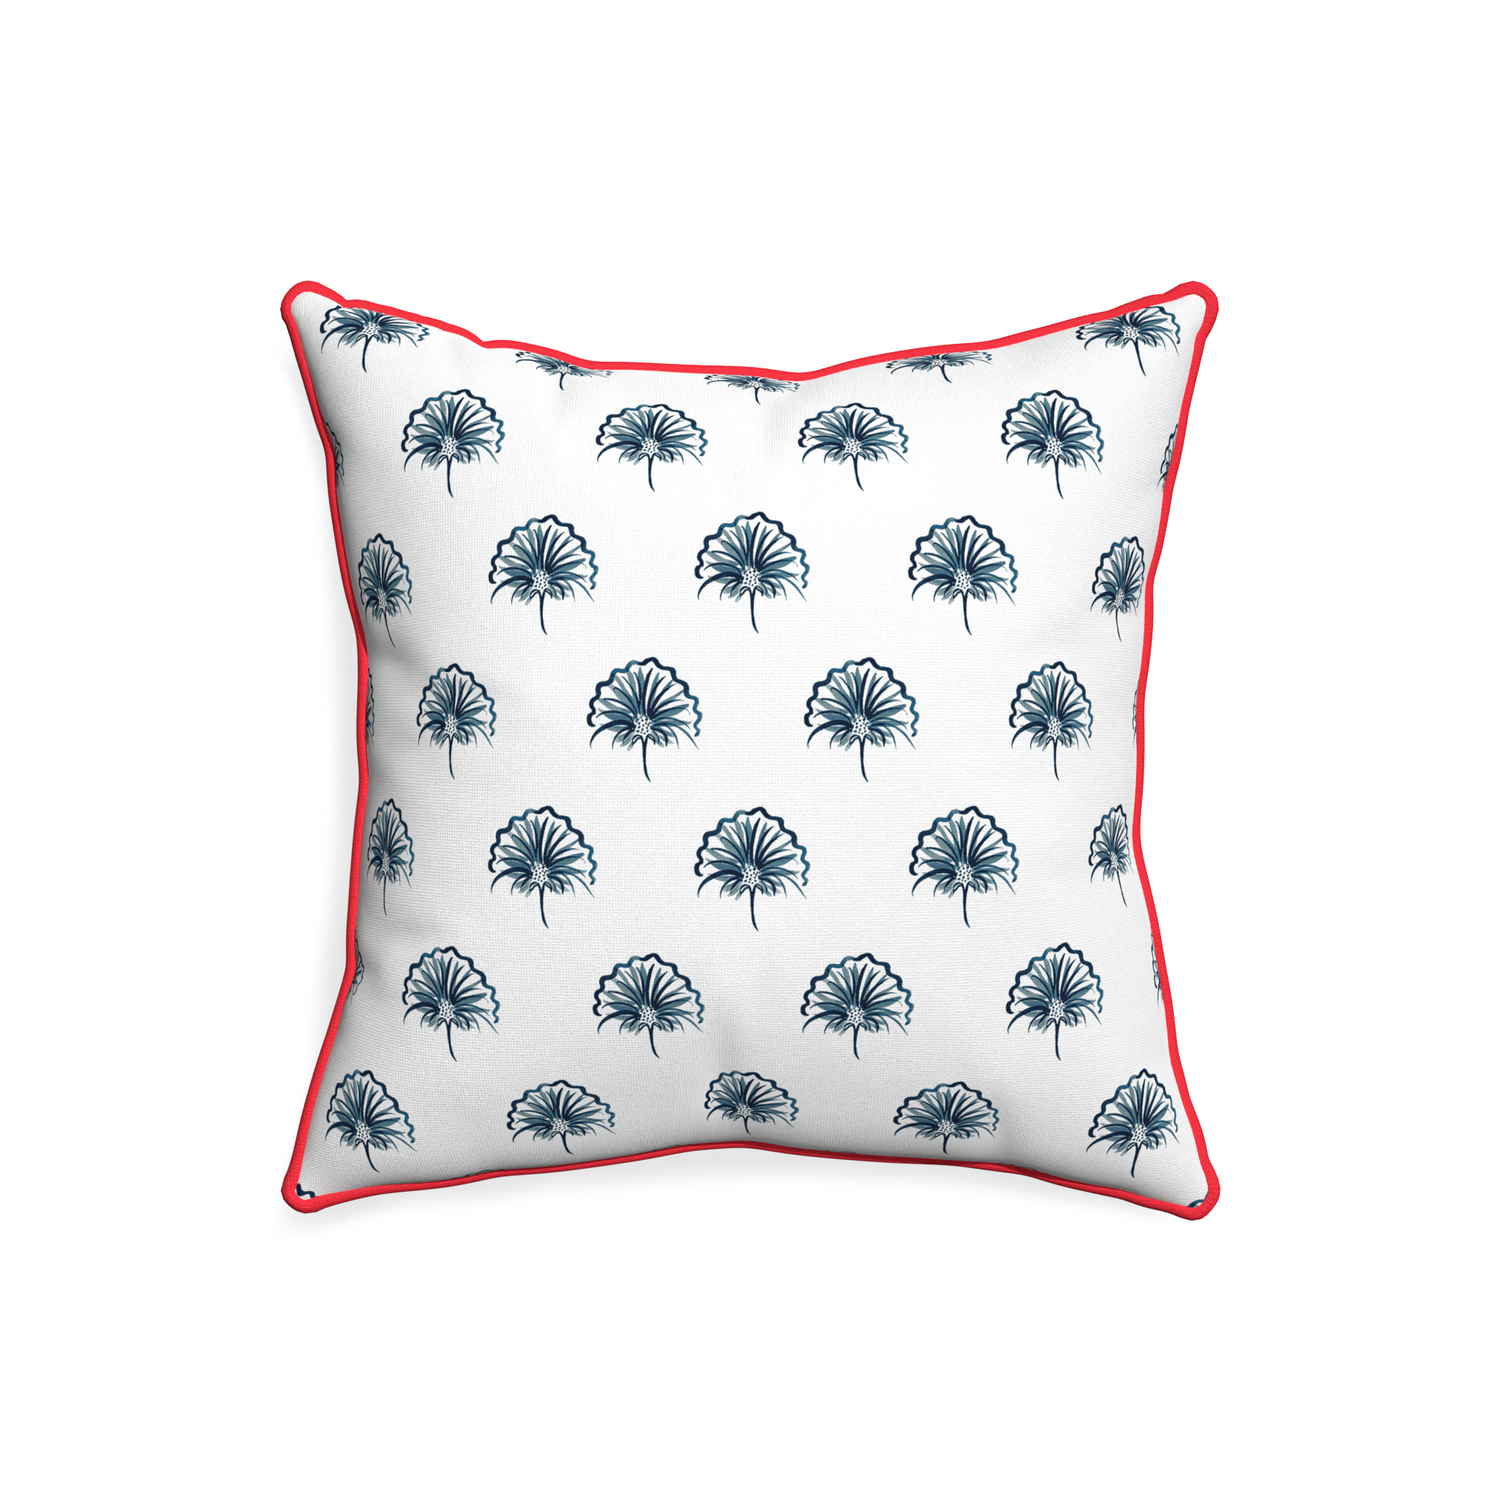 20-square penelope midnight custom pillow with cherry piping on white background